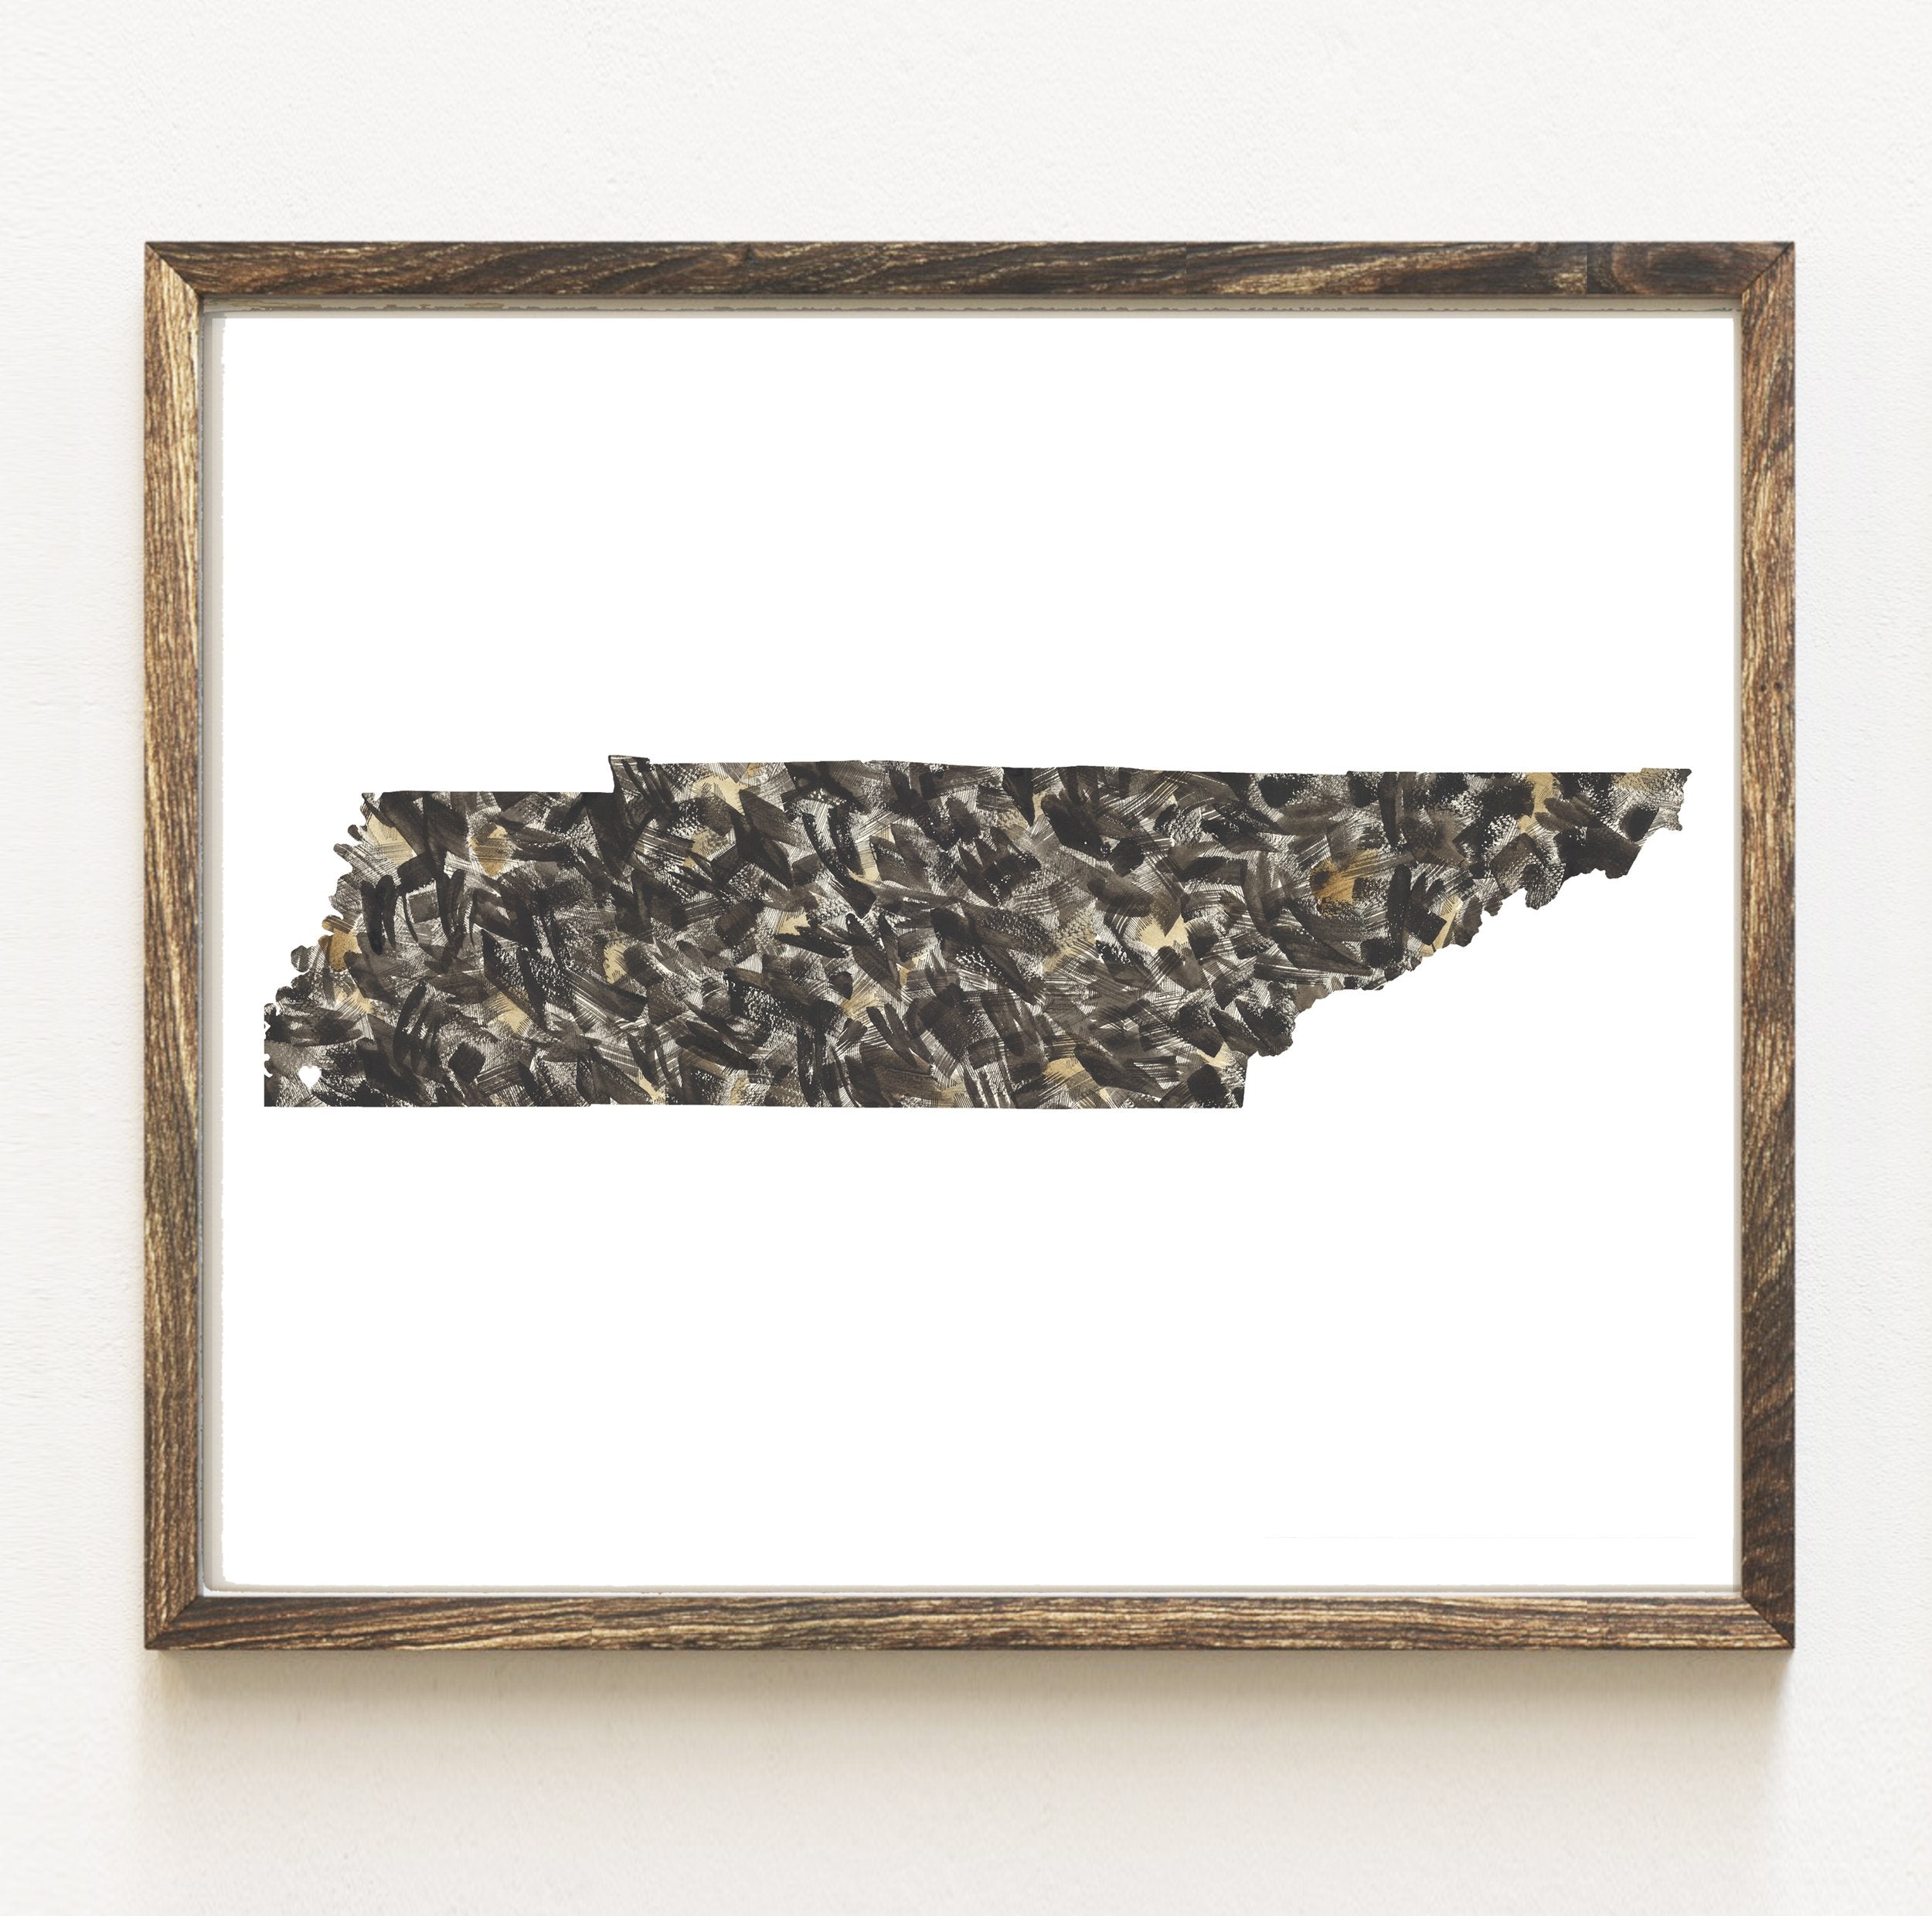 TENNESSEE State Map: PRINT